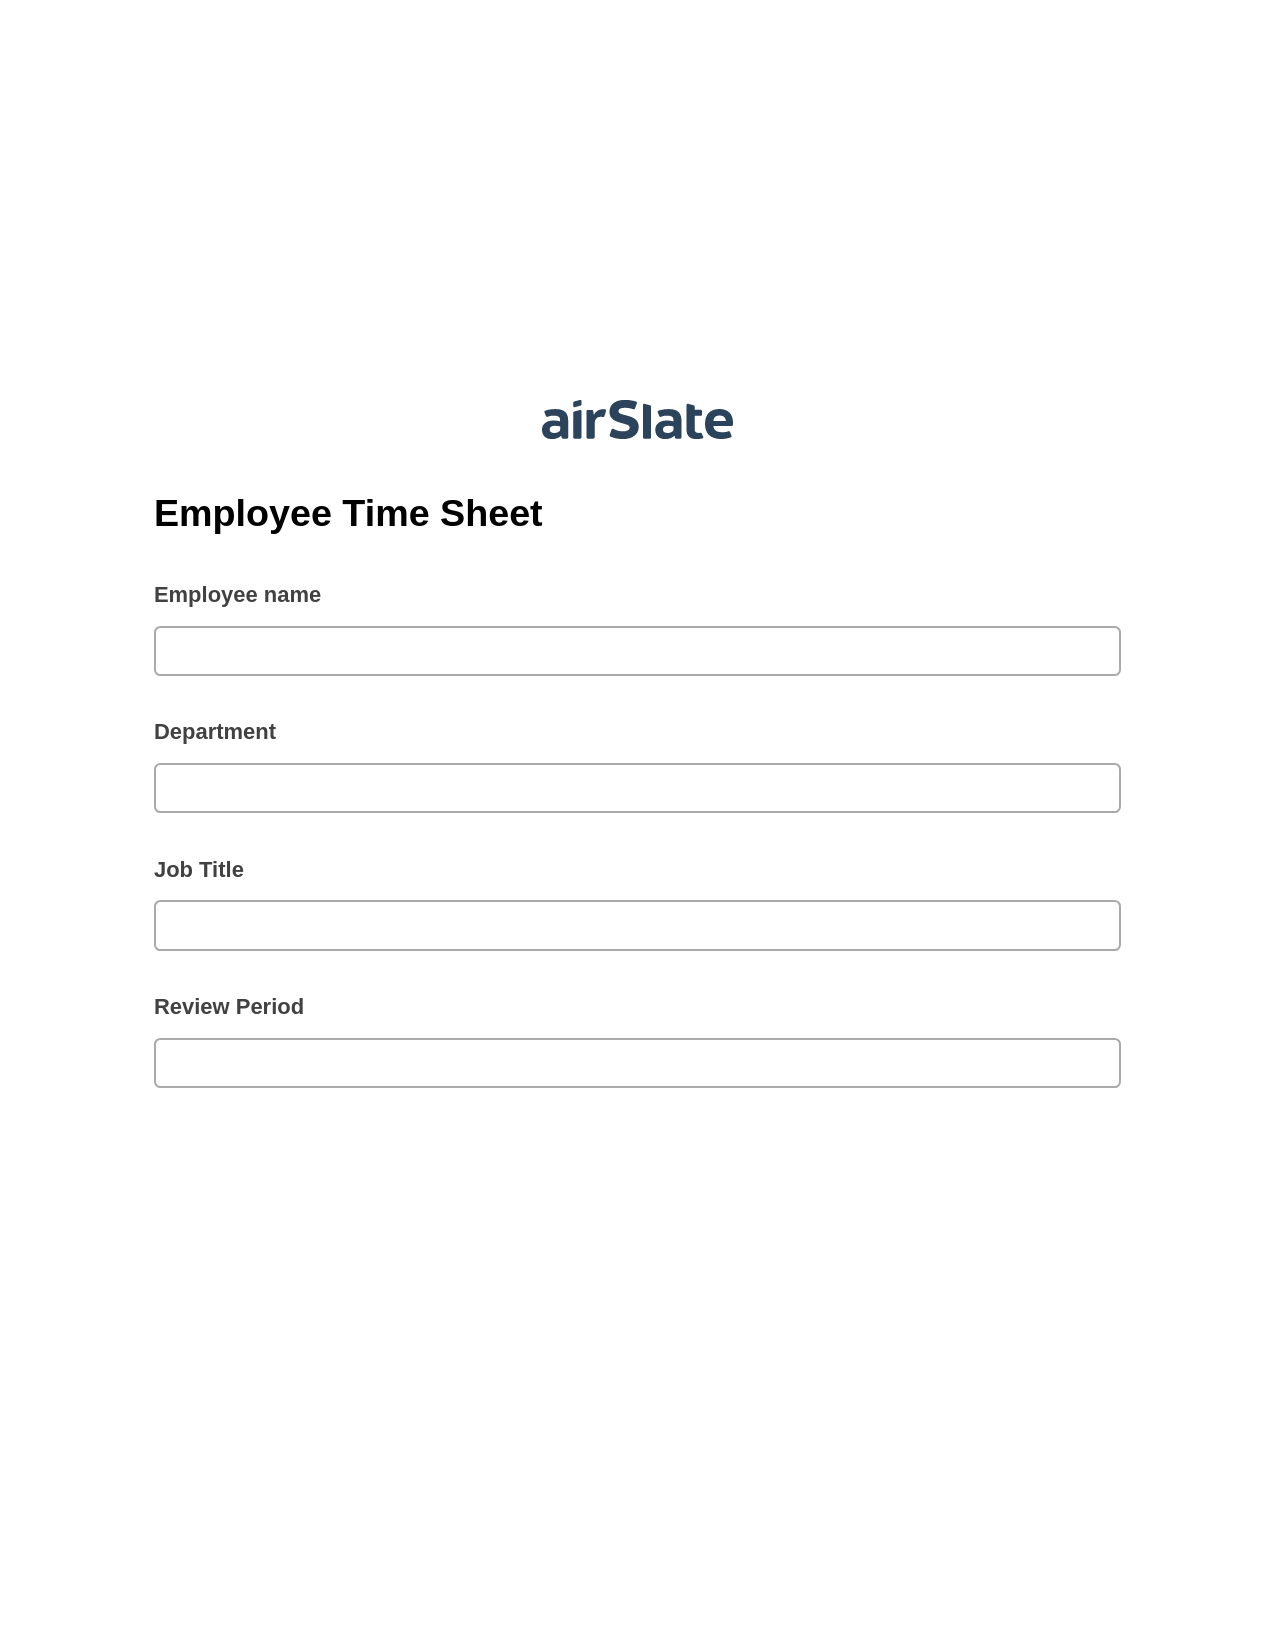 Employee Time Sheet Pre-fill from Google Sheets Bot, Create slate addon, Export to NetSuite Bot